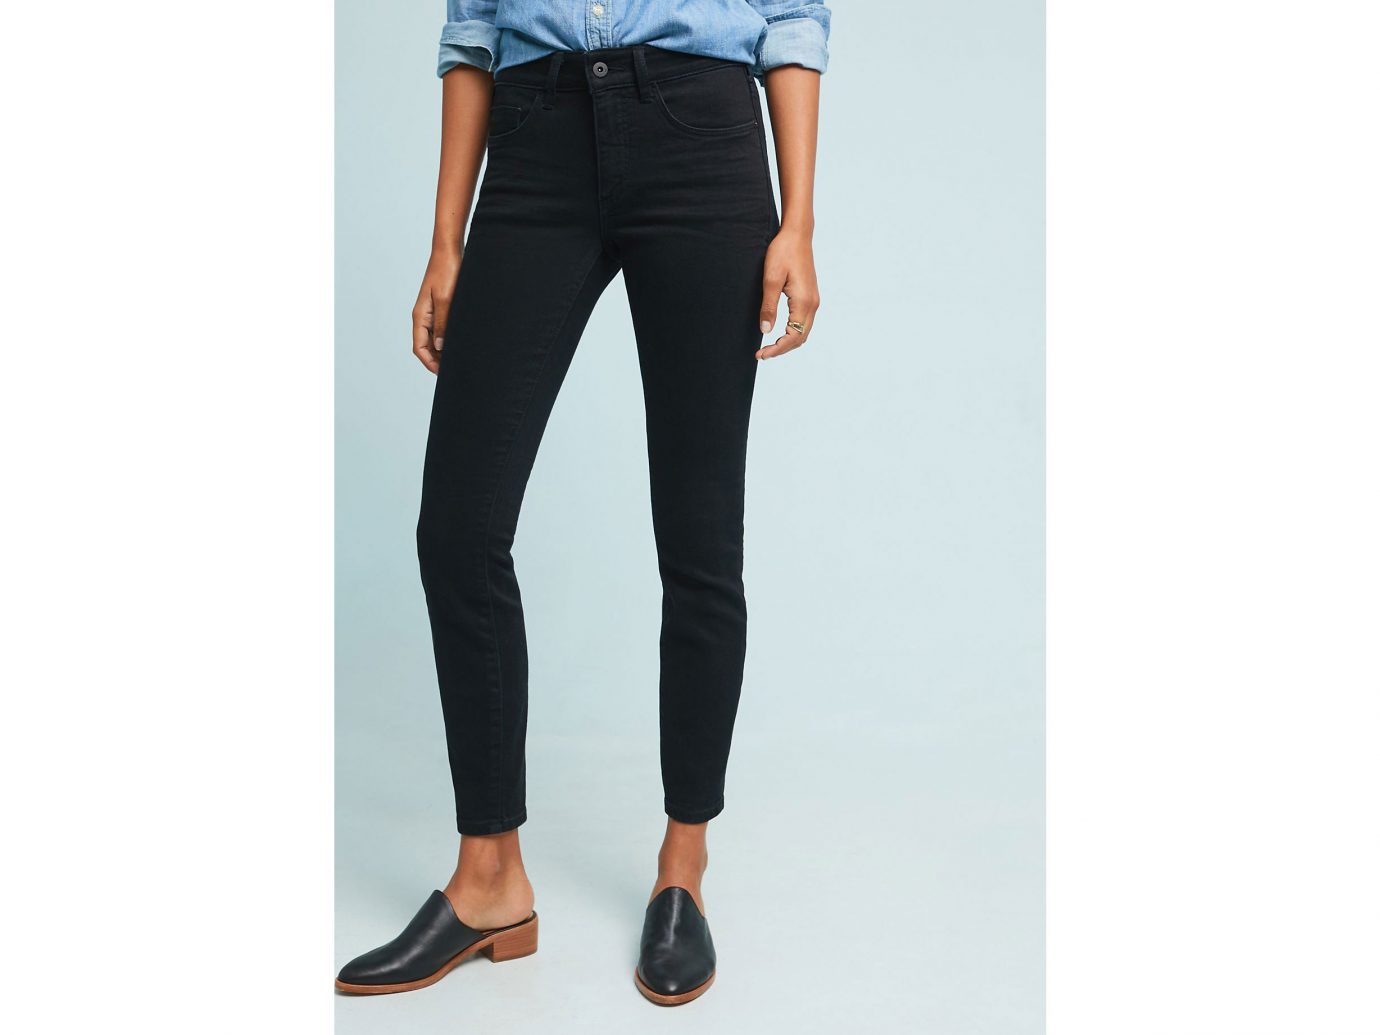 Pilcro High-Rise Skinny Jeans